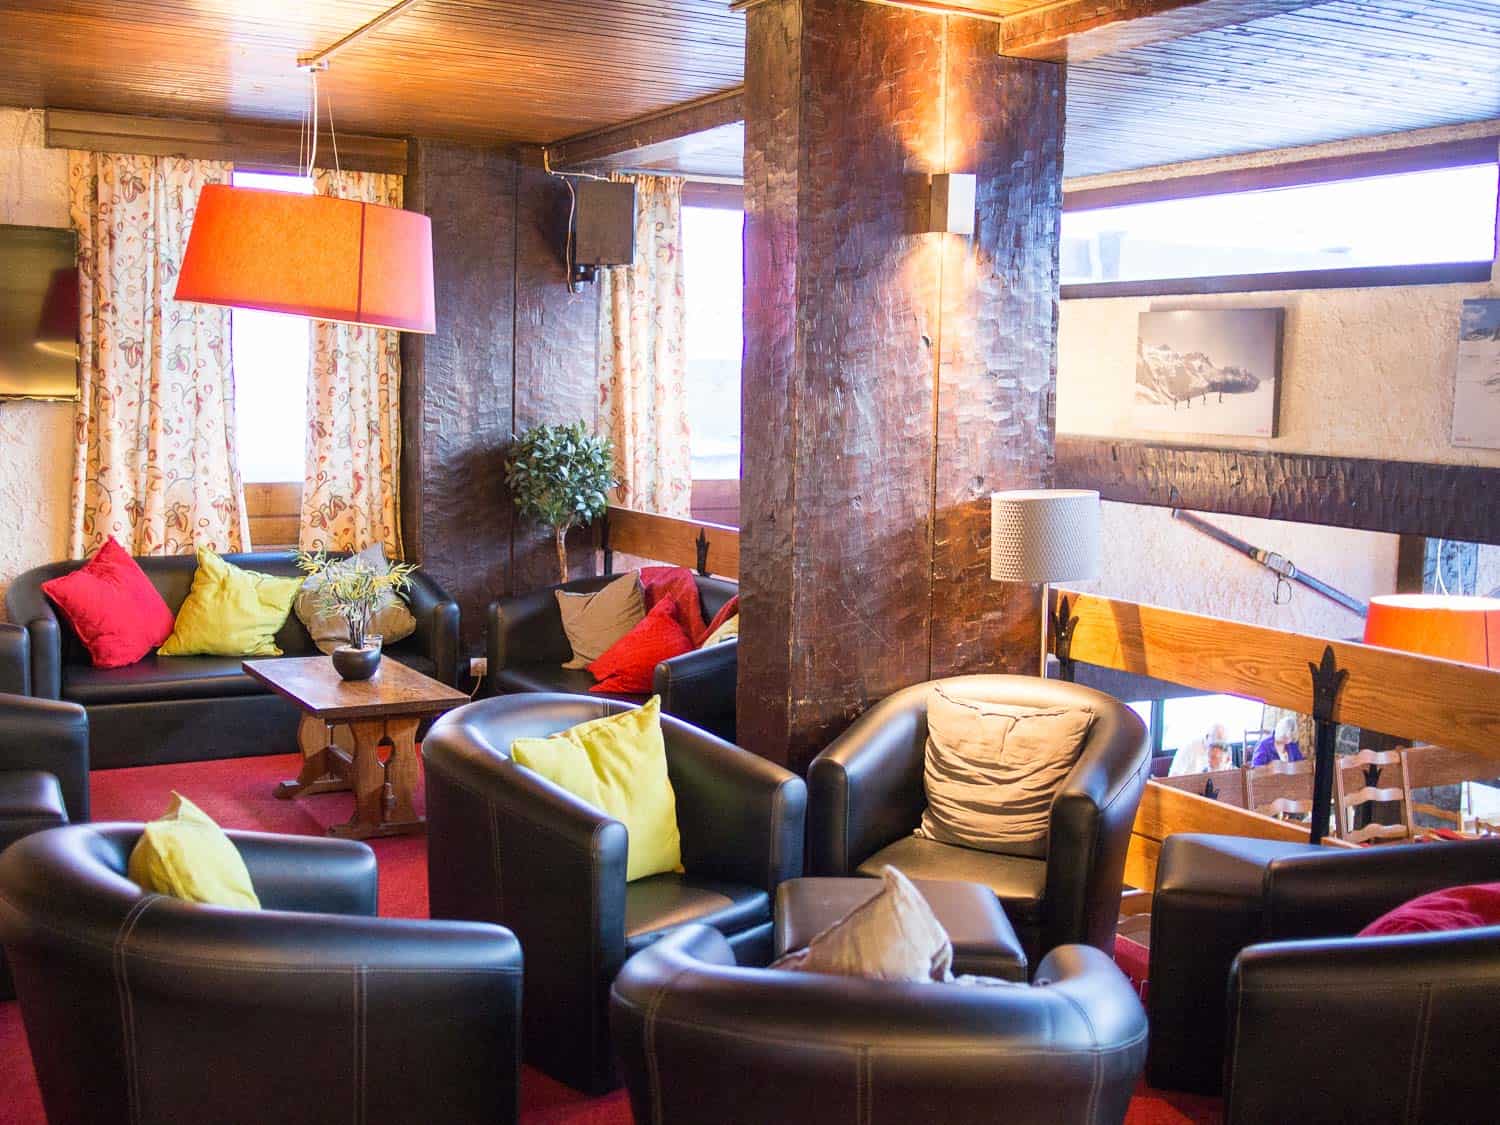 Hotel Haut de Toviere bar and lounge